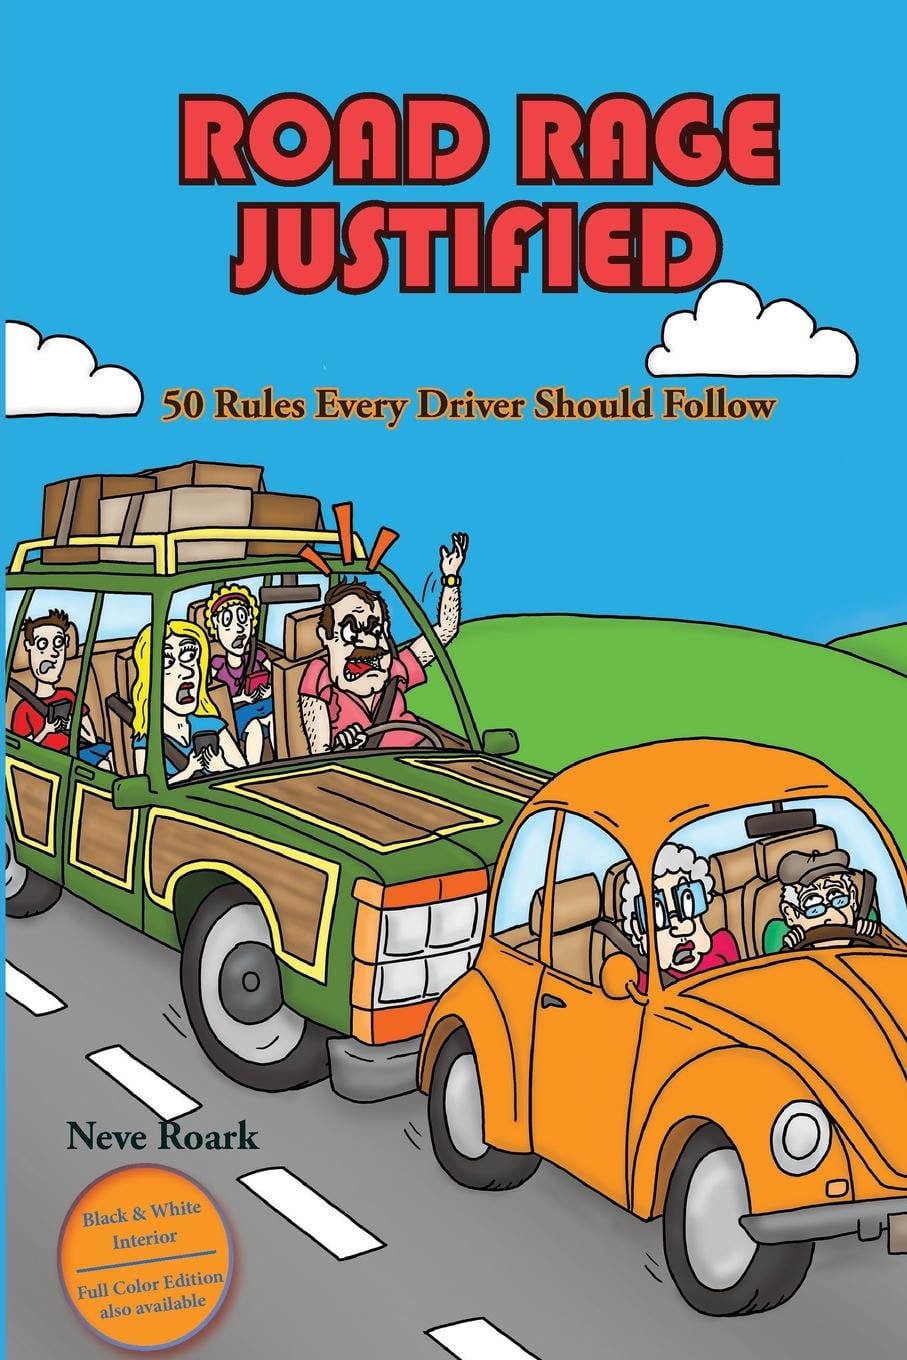 Road Rage Justified (black and white interior edition): 50 Rules Every ...